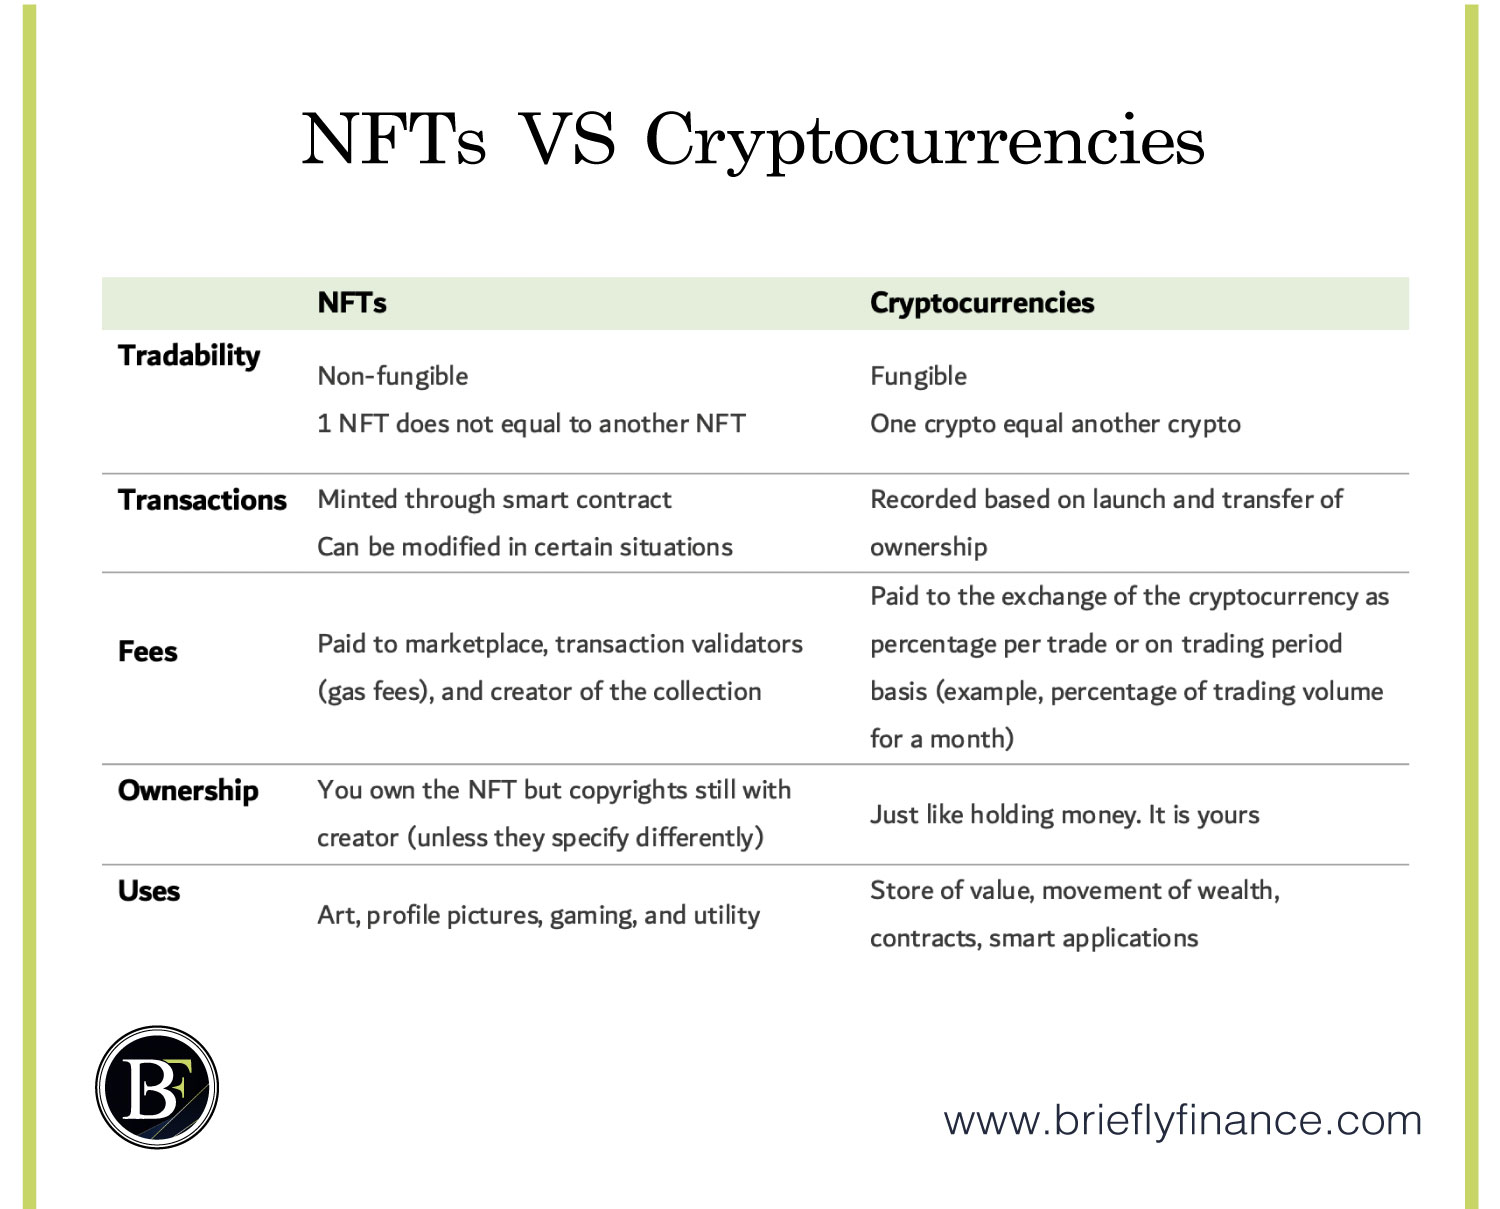 whats the difference between cryptocurrencies